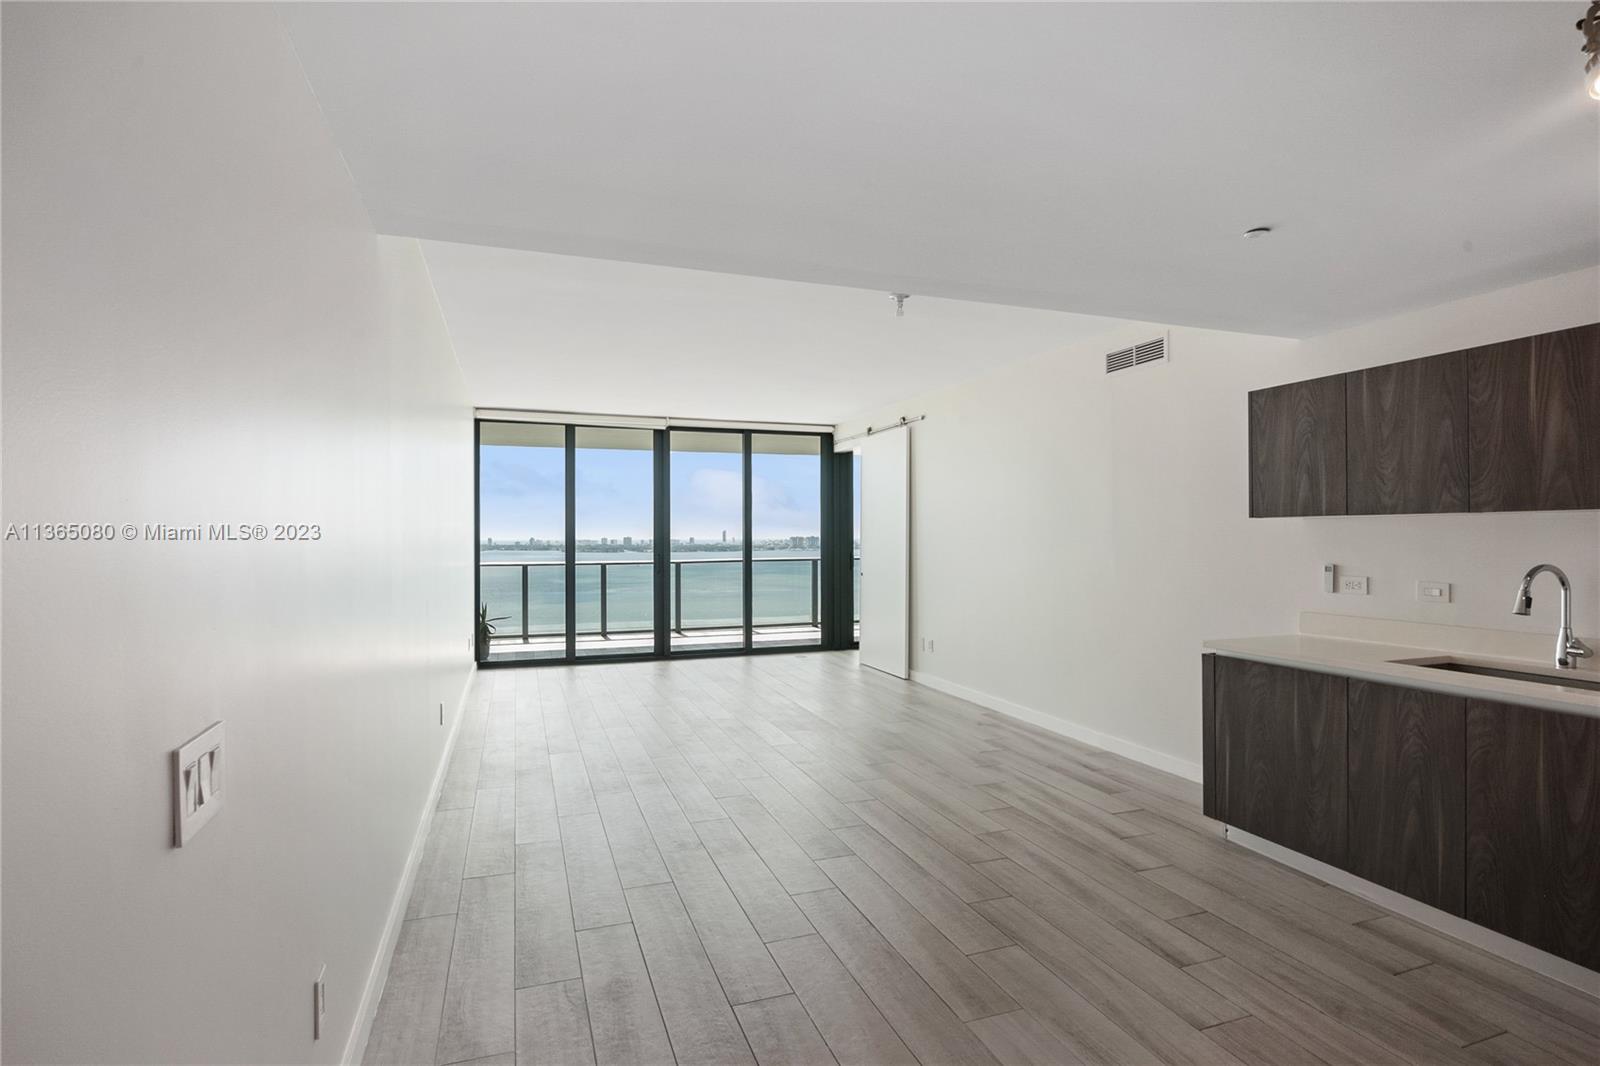 Photo 2 of Paraiso One Apt 2704 in Miami - MLS A11365080